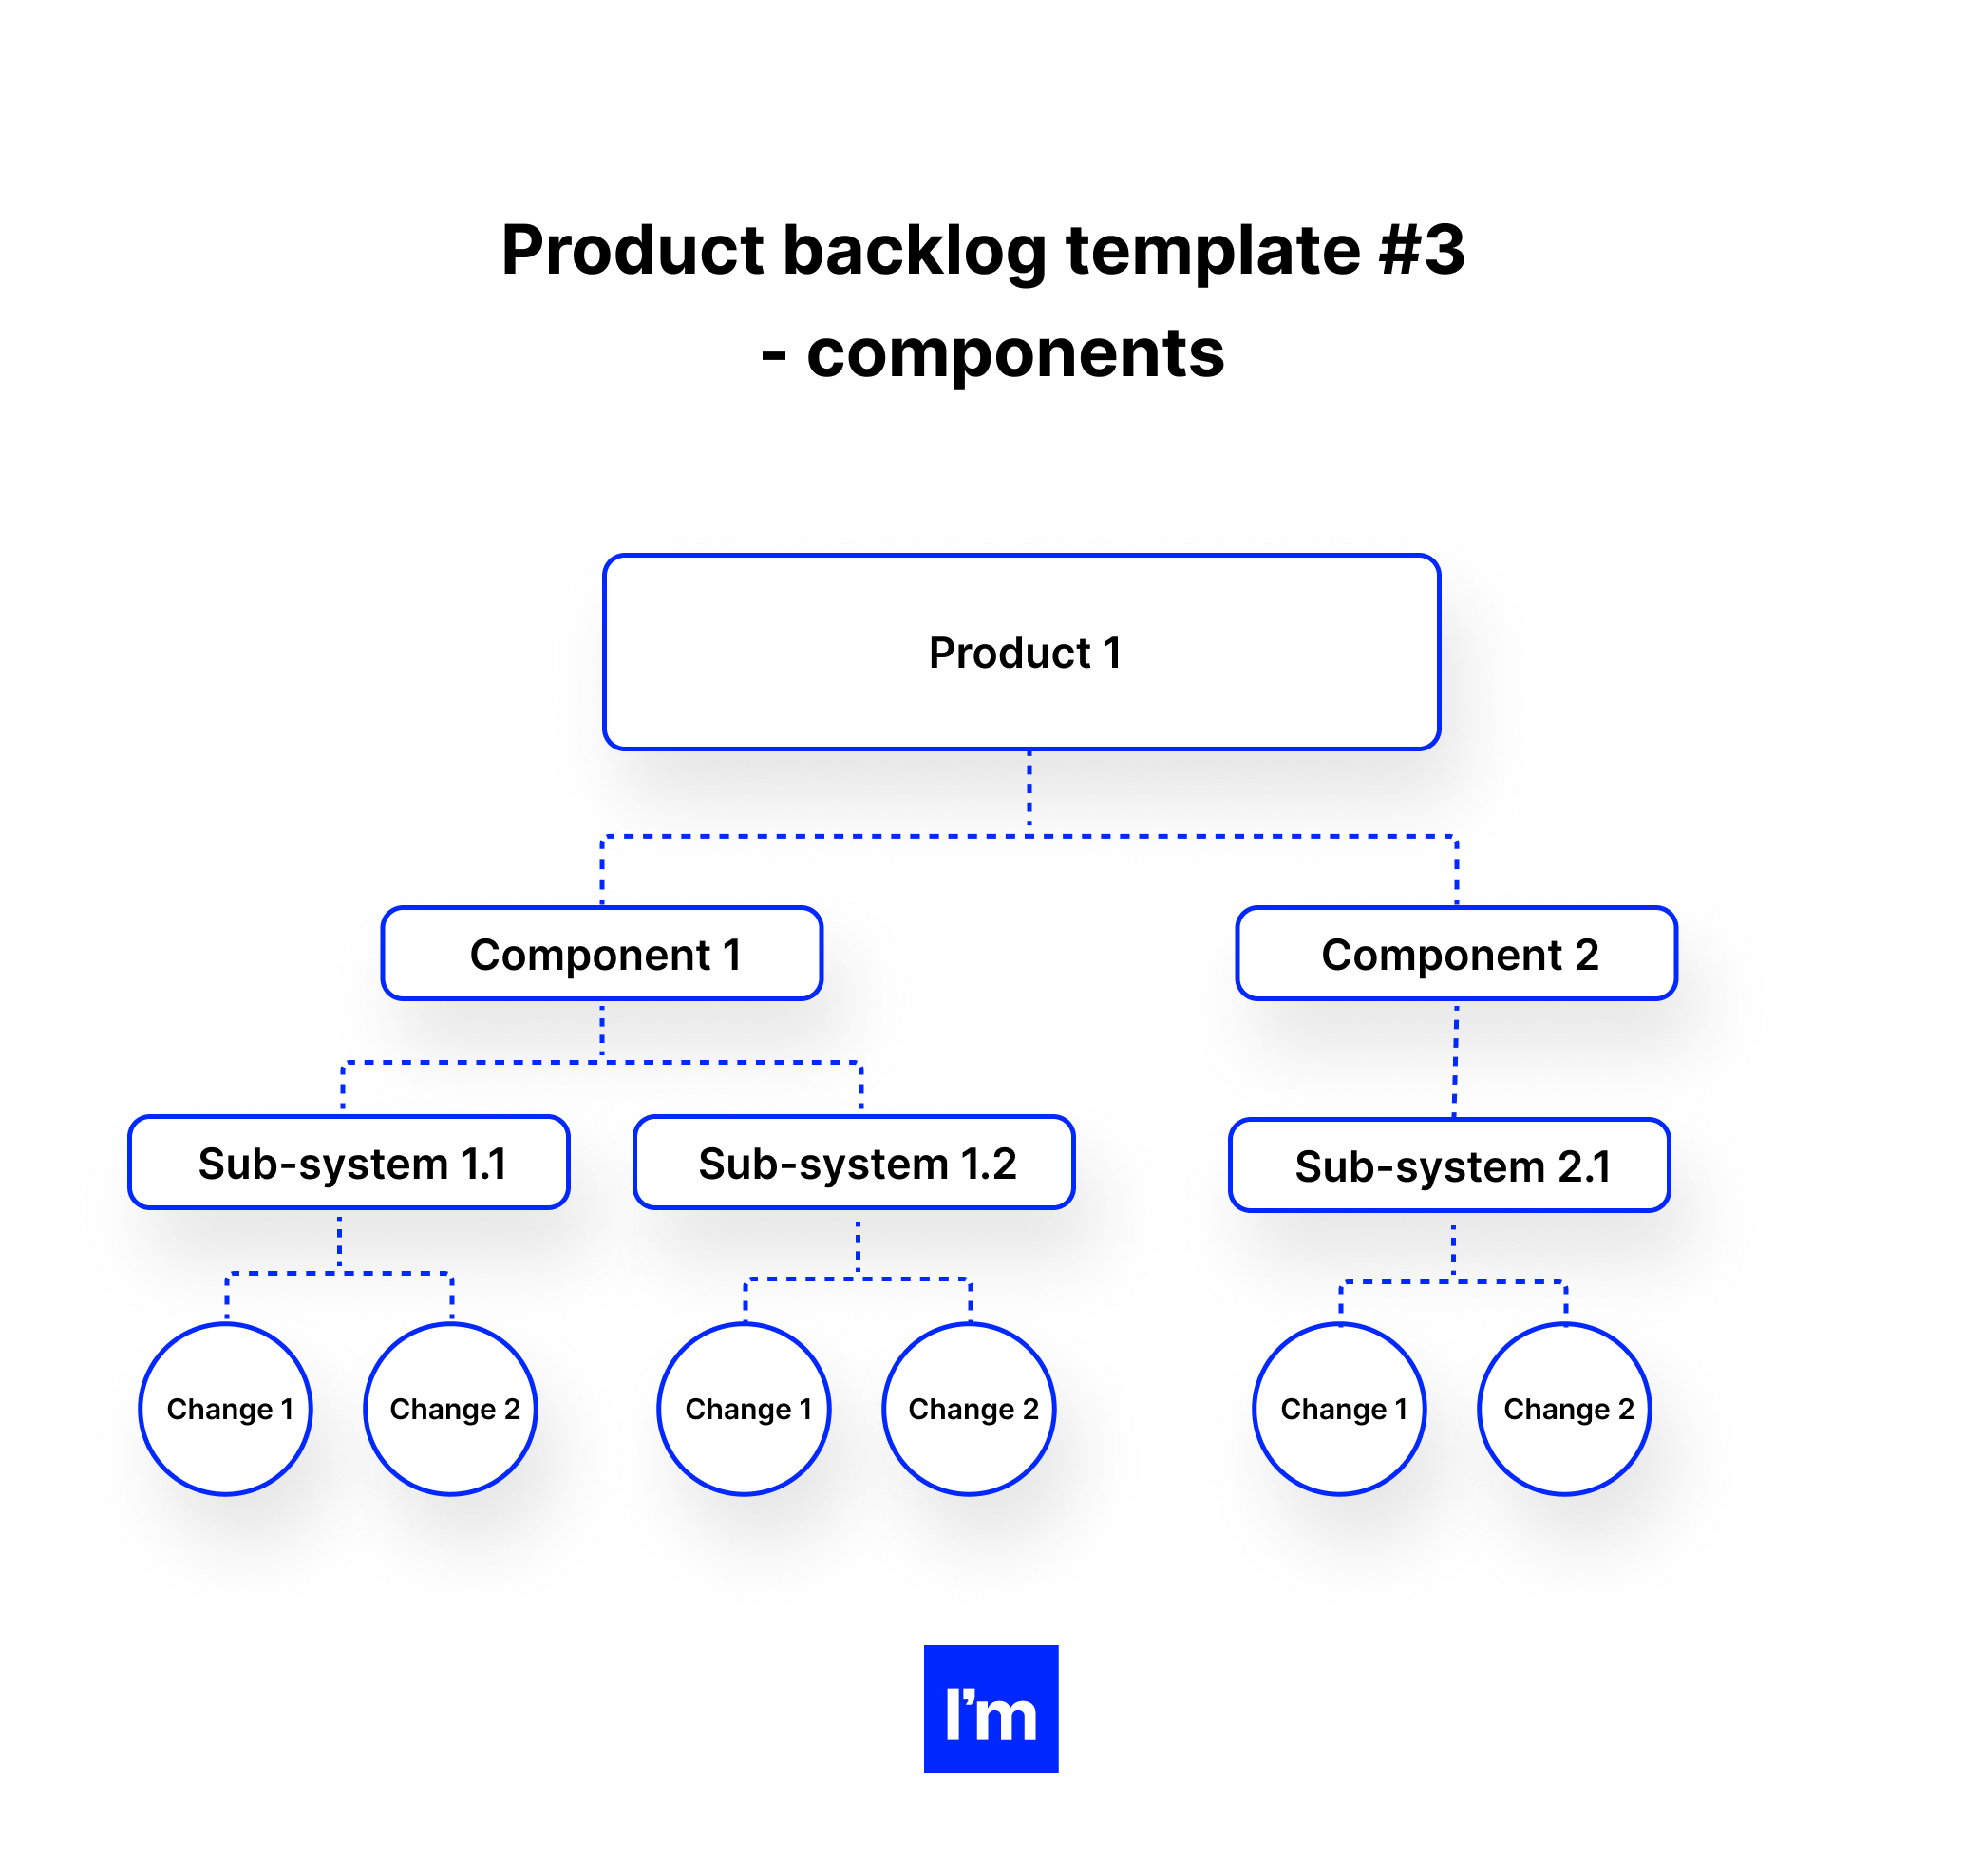 Product backlog template #3 - components